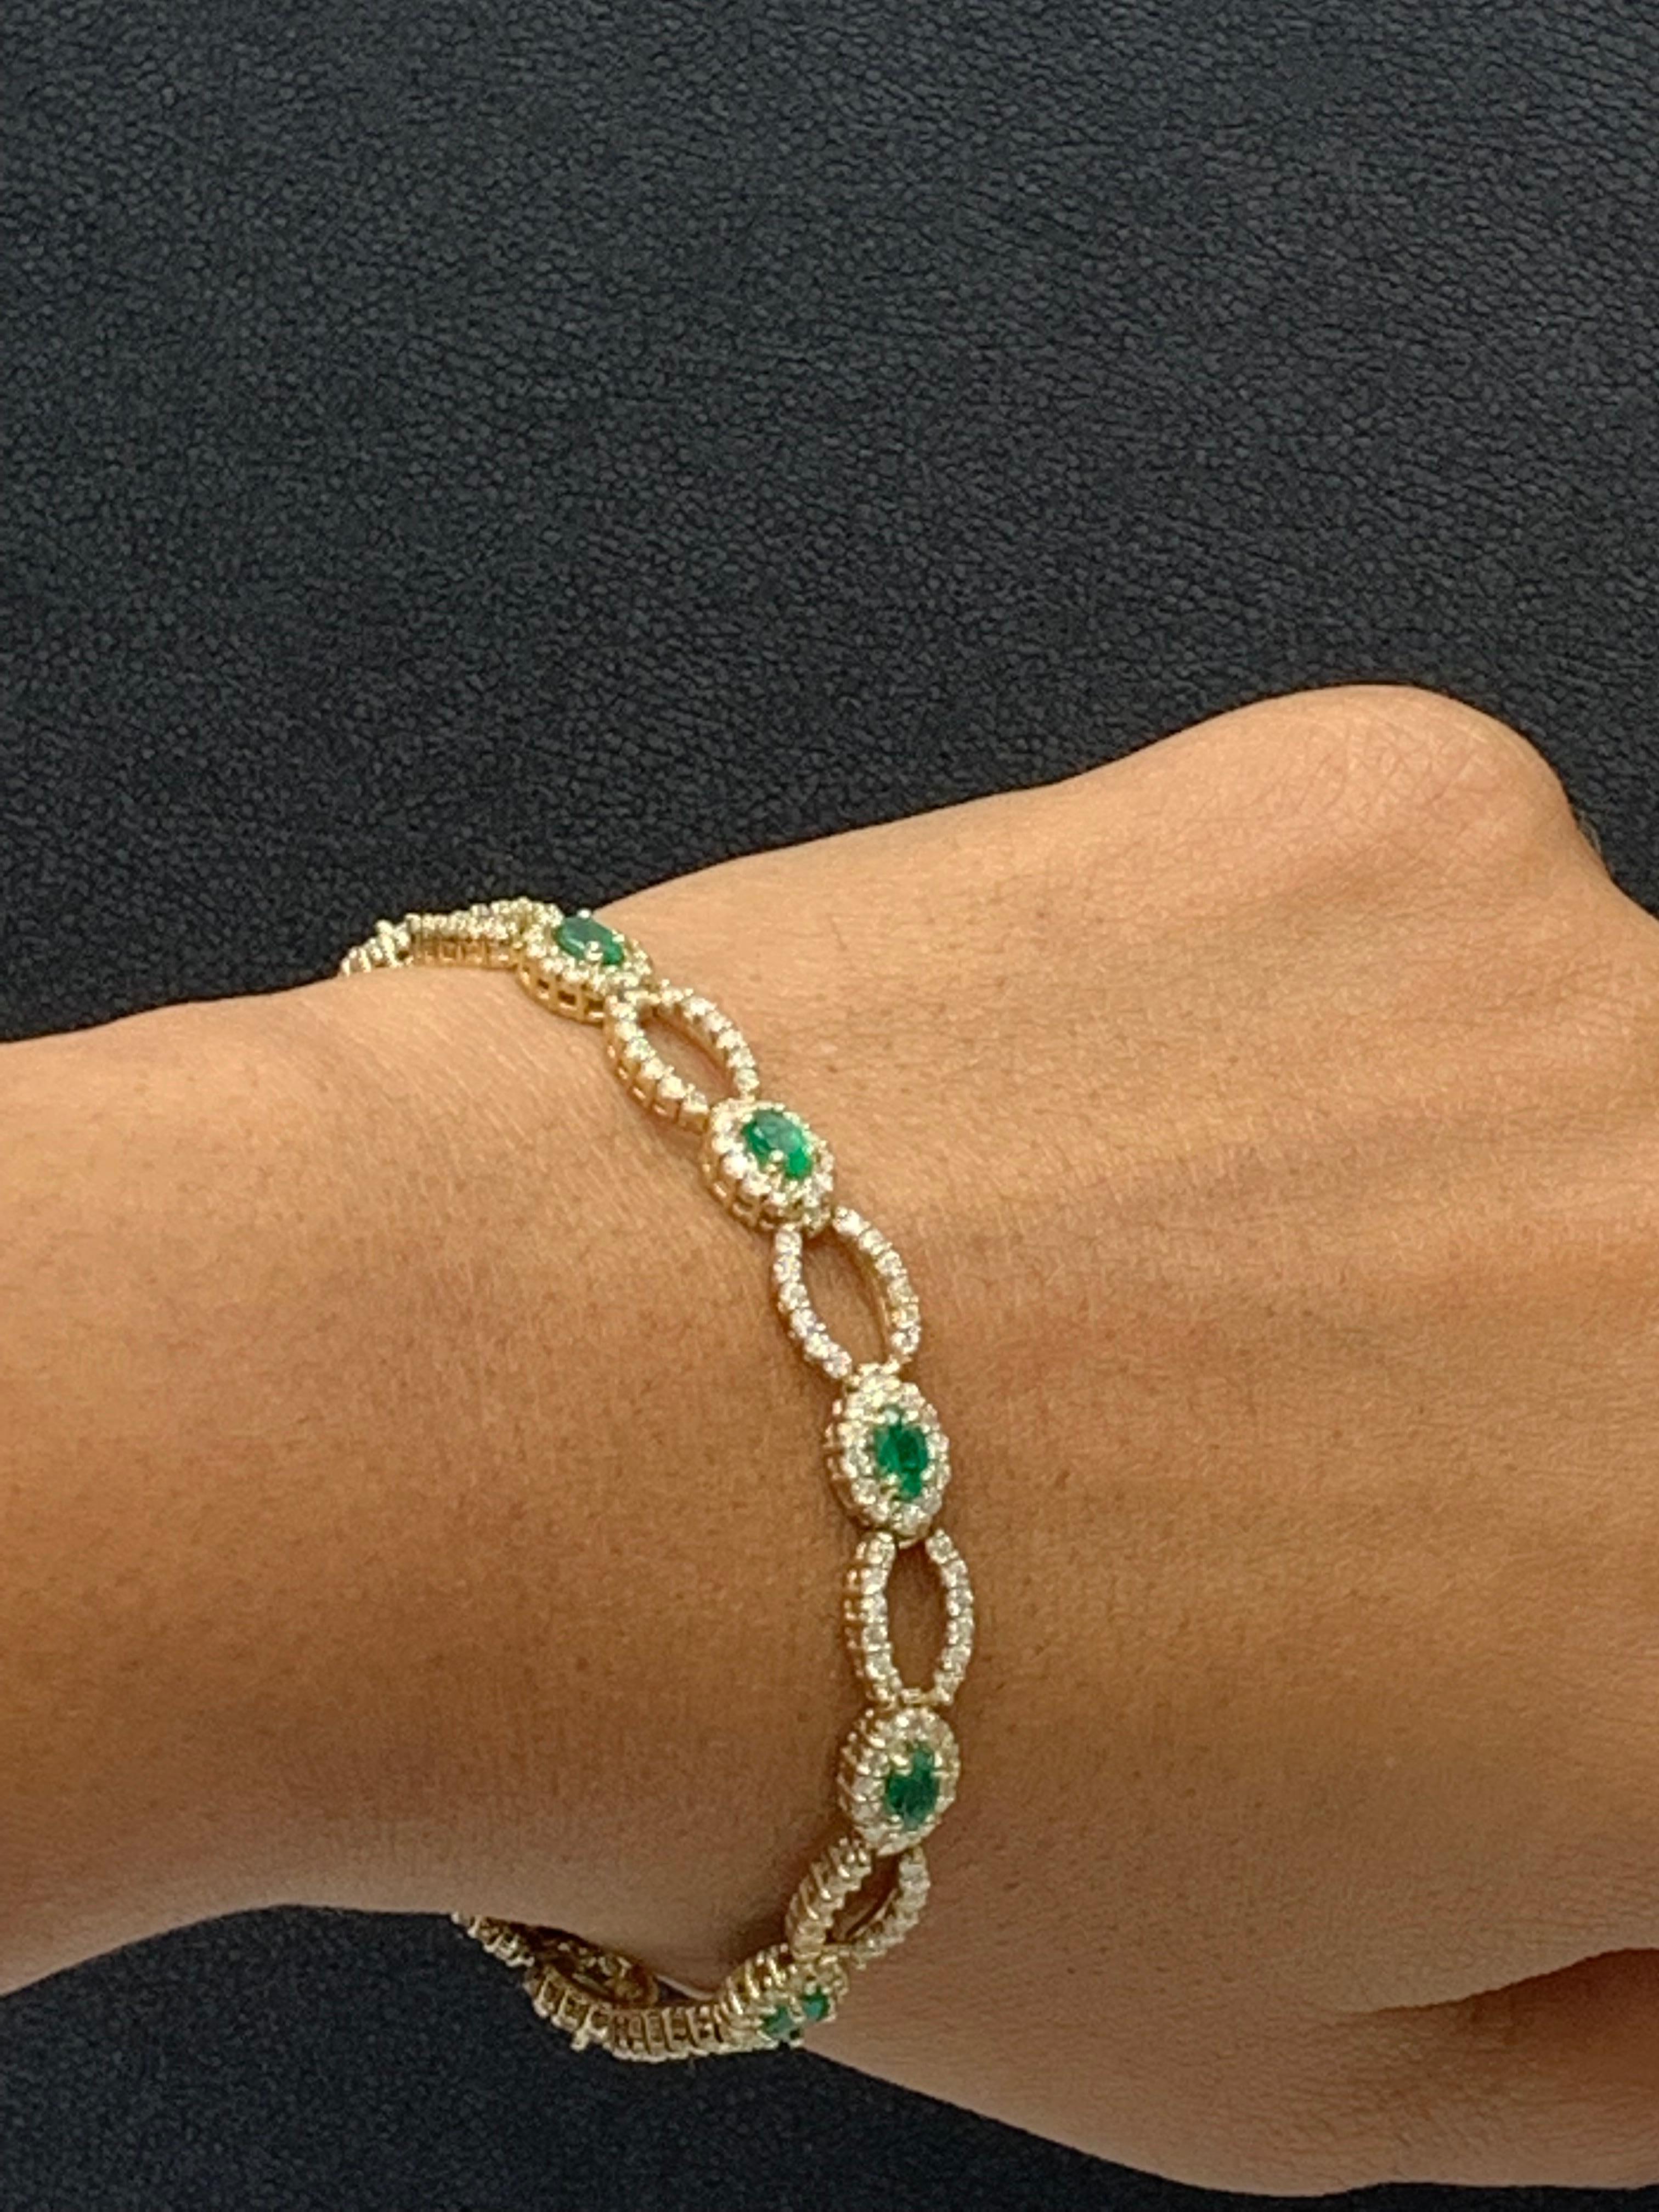 Open-Work 2.13 Carat Emerald and Diamond Bracelet in 14K Yellow Gold For Sale 6